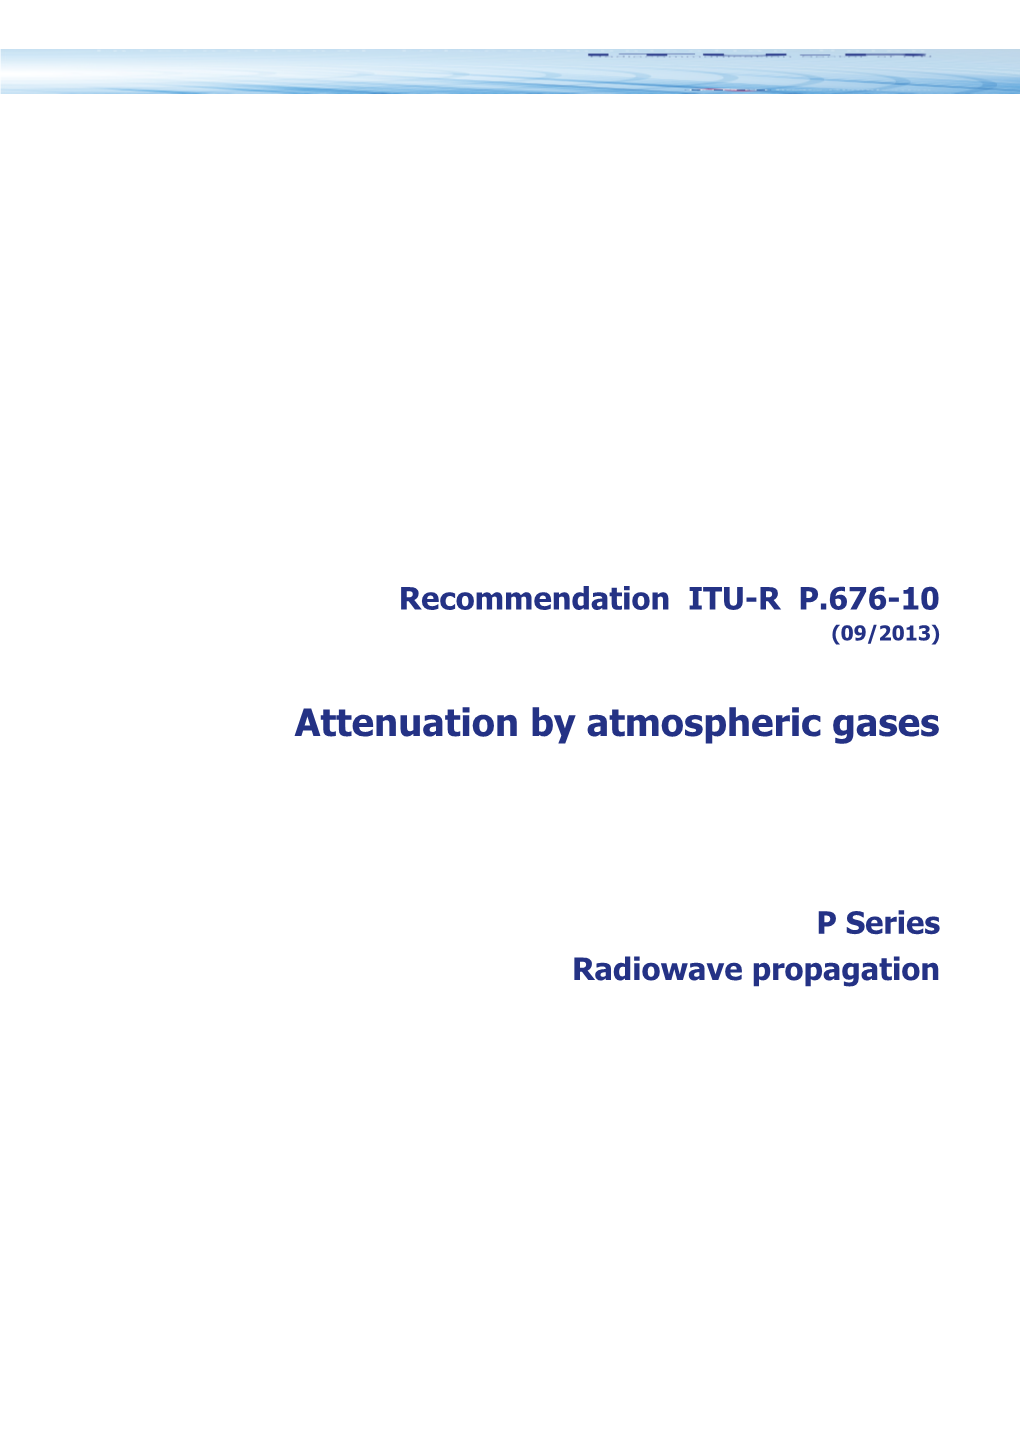 RECOMMENDATION ITU-R P.676-9 - Attenuation by Atmospheric Gases